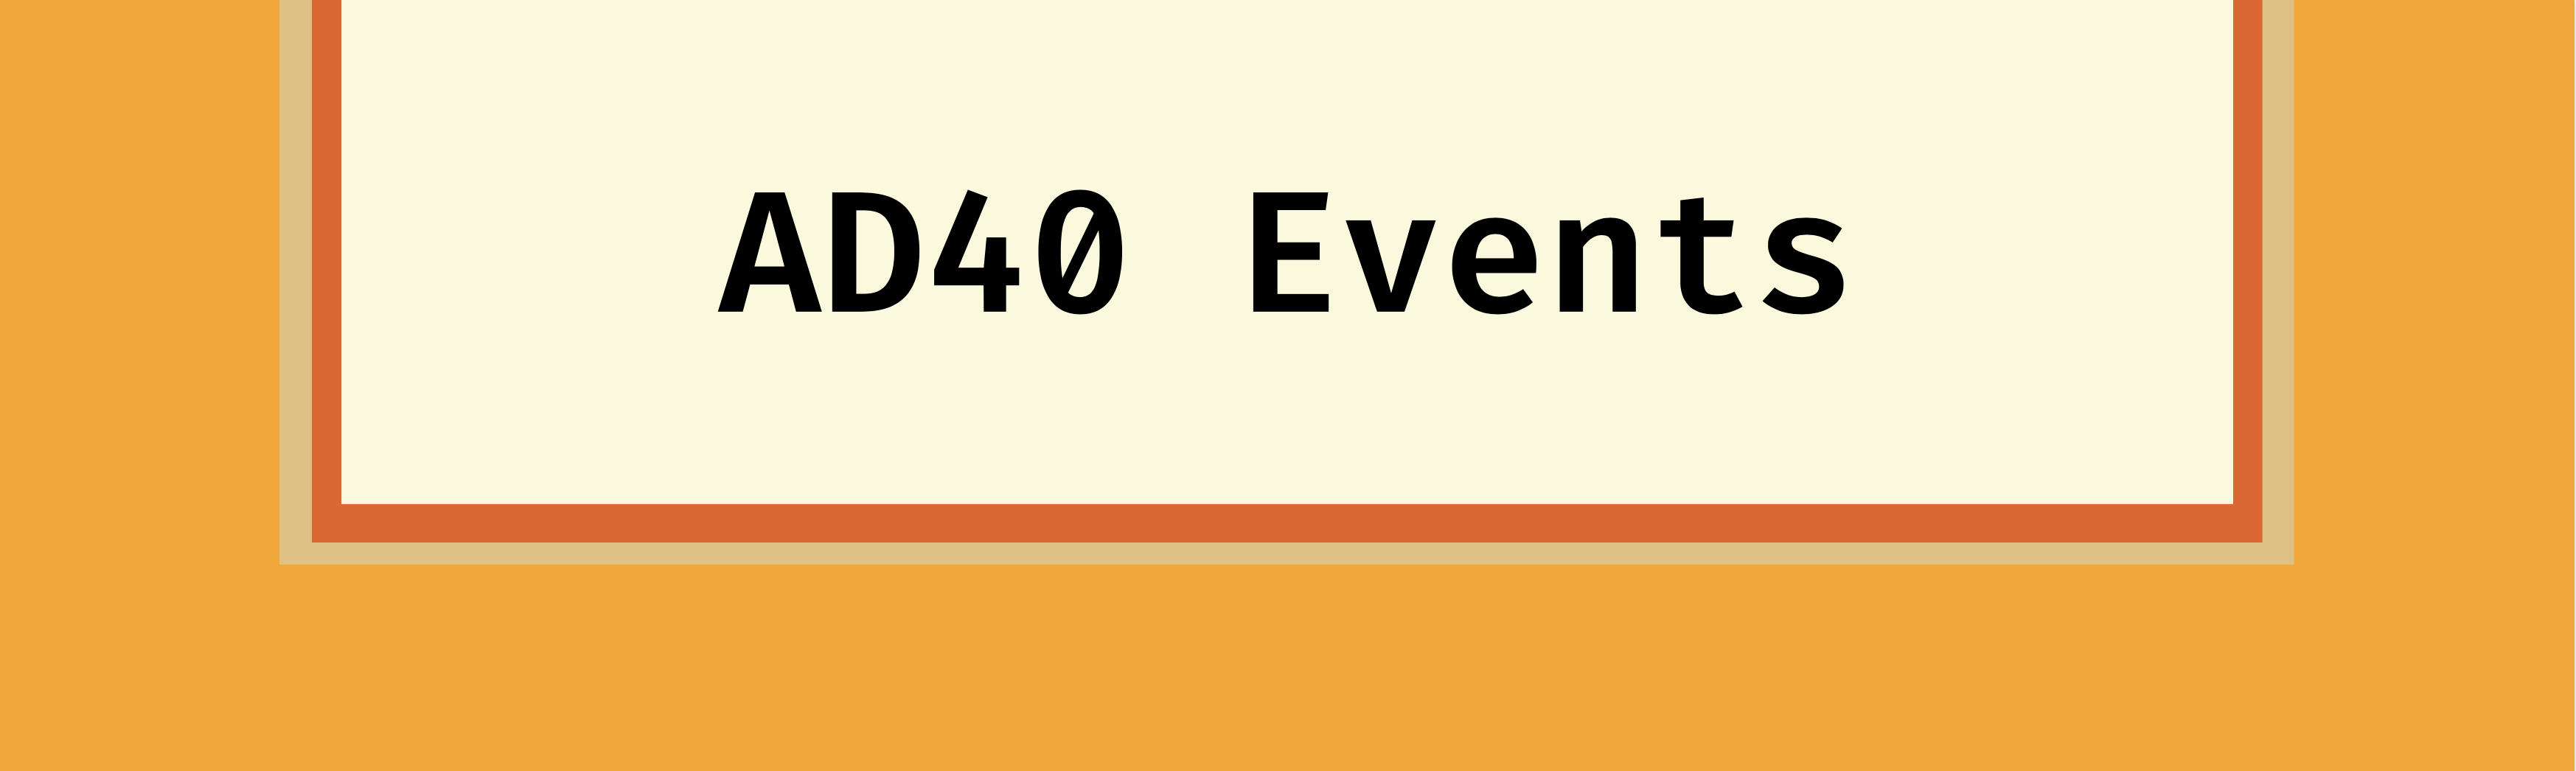 AD40 Events